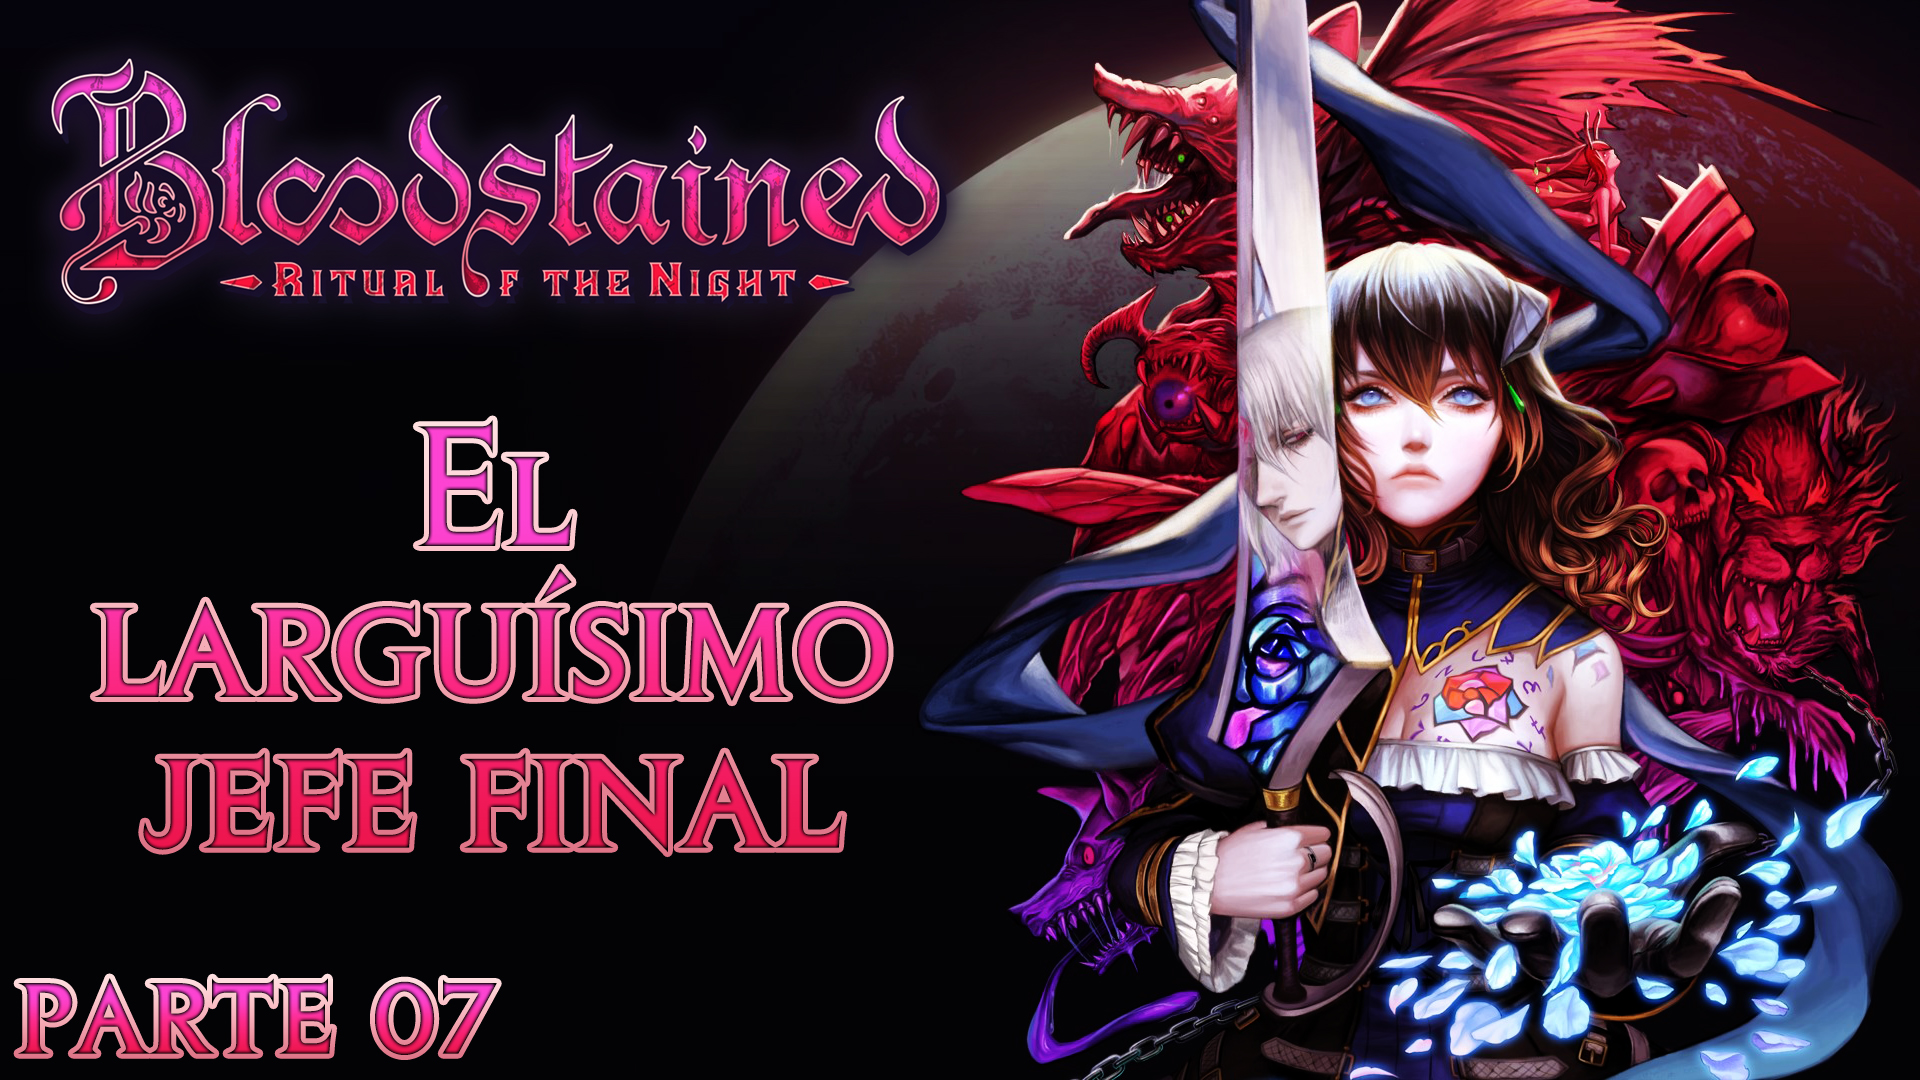 Serie Bloodstained Ritual of the Night #7 – El larguísimo jefe final